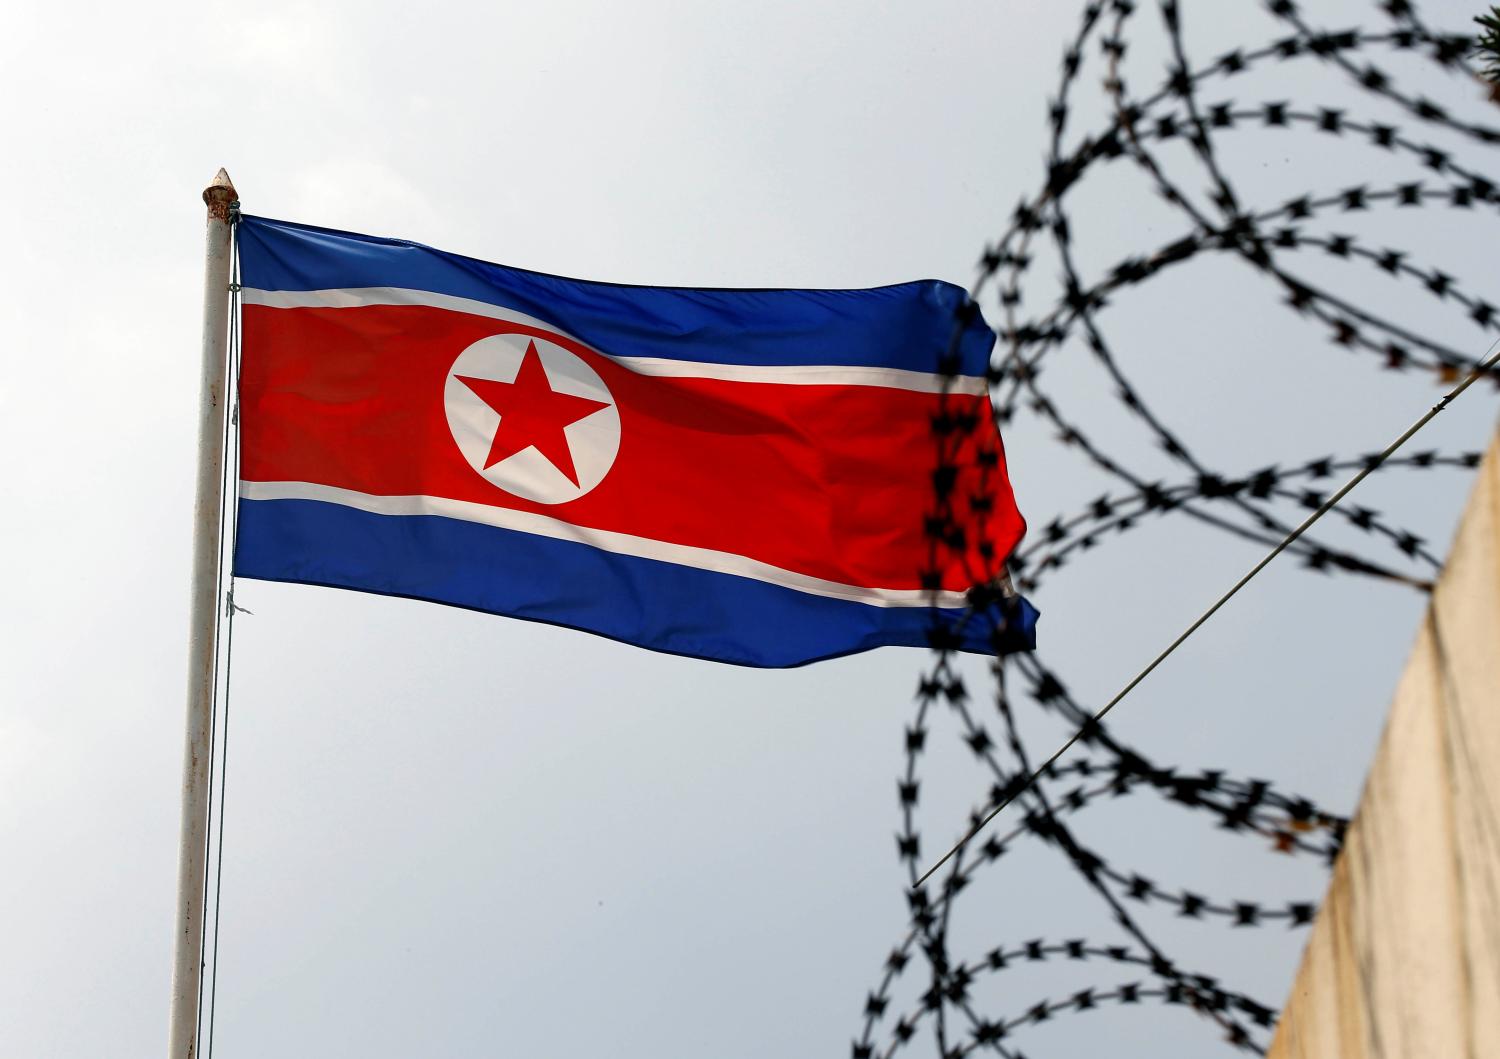 The North Korea flag flutters next to concertina wire at the North Korean embassy in Kuala Lumpur, Malaysia March 9, 2017. REUTERS/Edgar Su - RTS122QZ